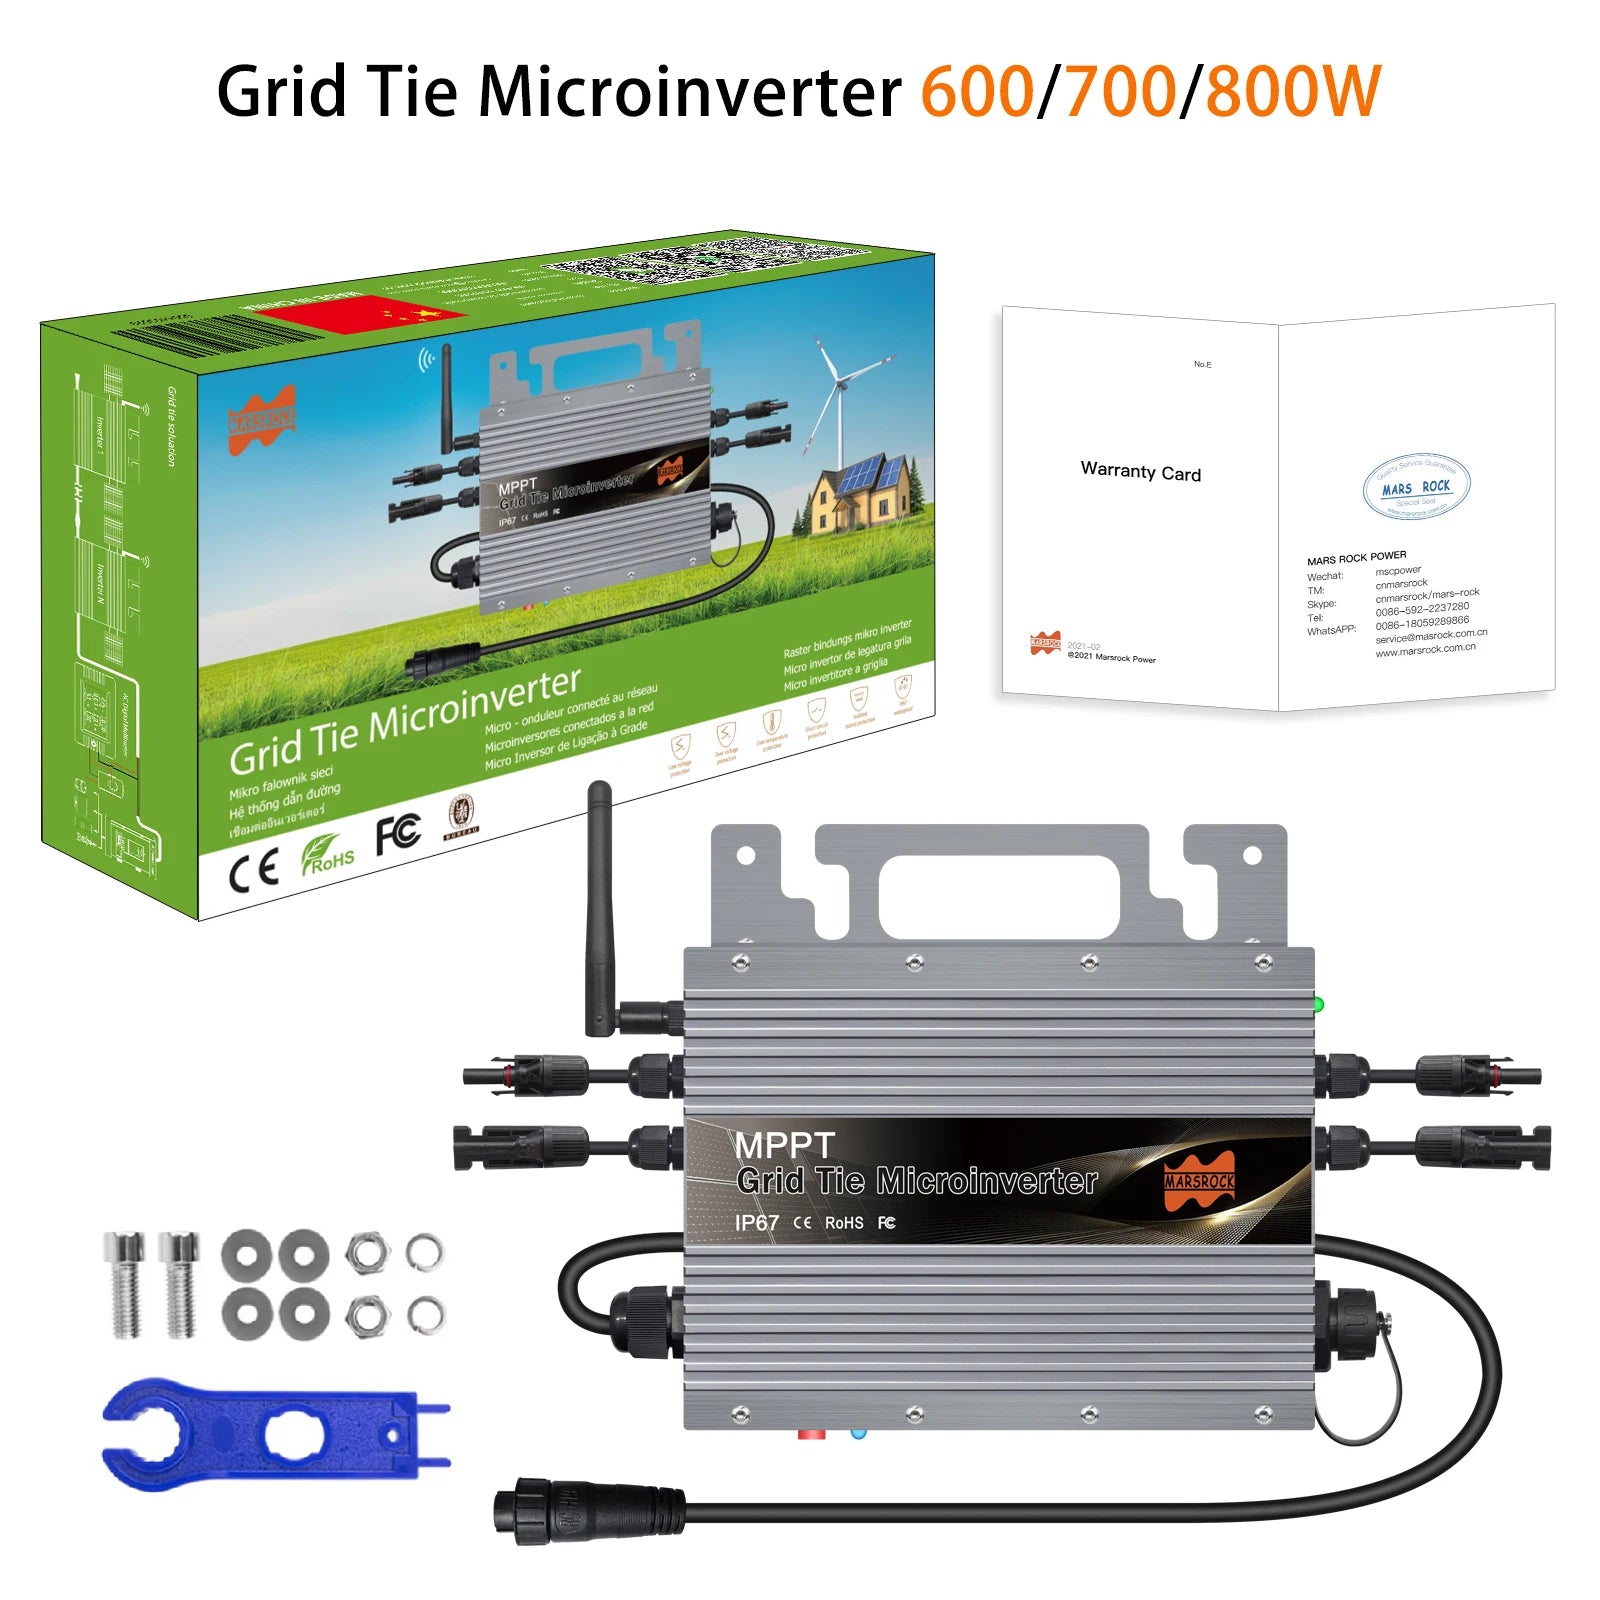 800W Grid Tie Micro Inverter, Grid Tie Micro Inverter for solar panels, 20-60VDC output, WiFi connectivity, and EU shipping.